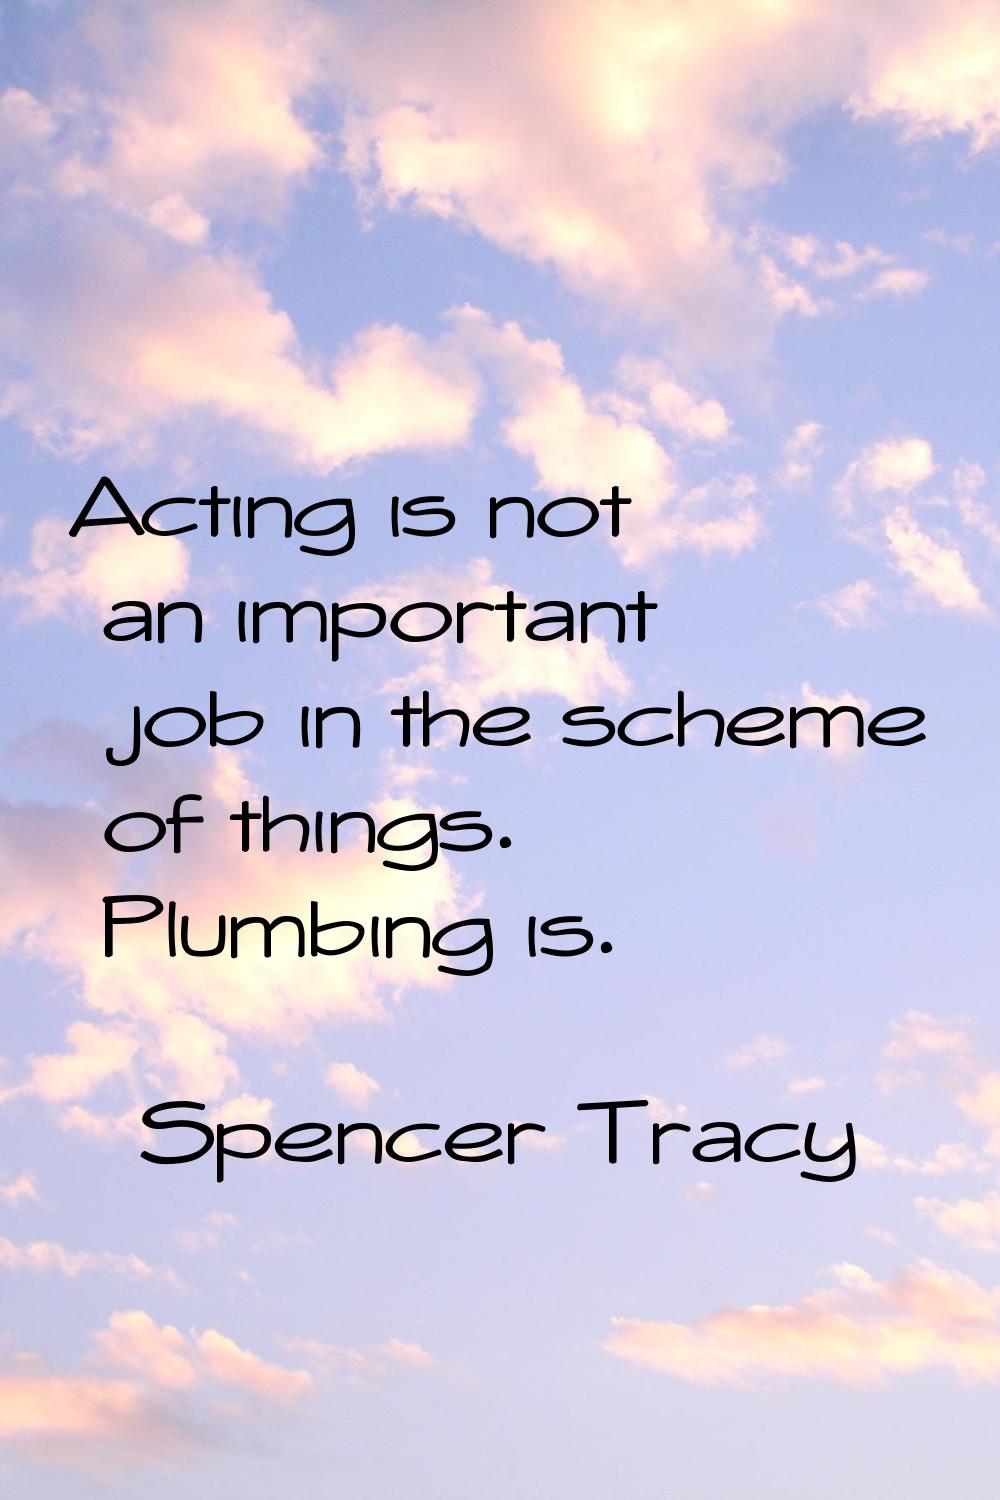 Acting is not an important job in the scheme of things. Plumbing is.